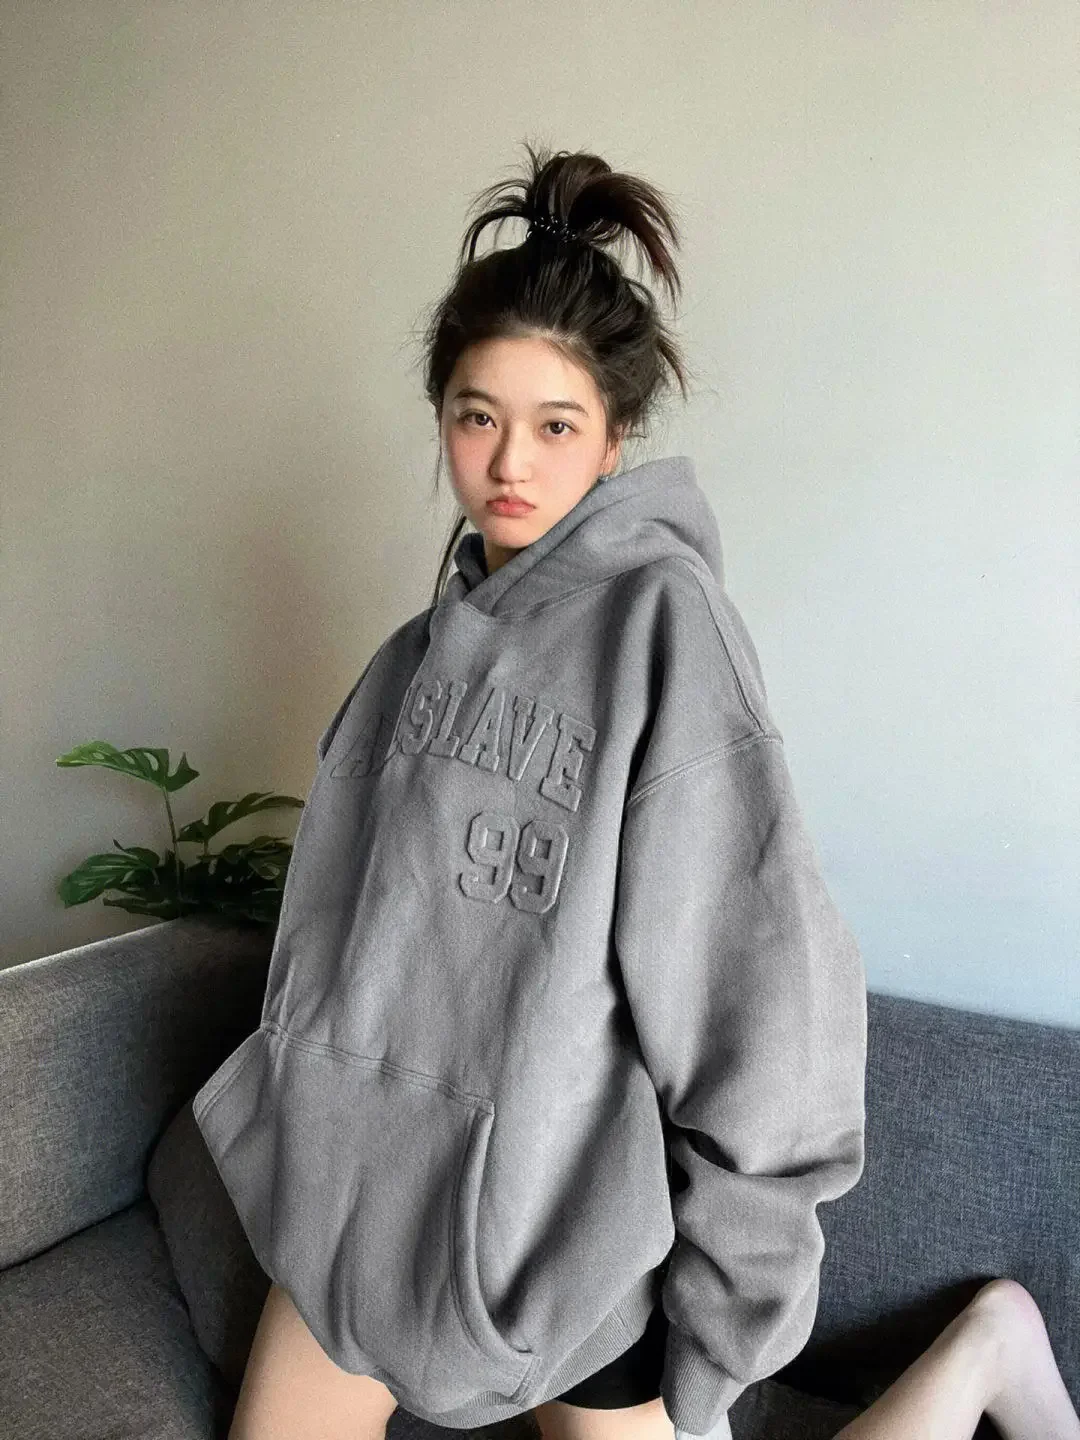 

Hooded Female Clothes Pullovers Baggy Letter Printing Long Grunge Loose Hoodies Text Sweatshirts for Women Tops Grey Y2k Style E